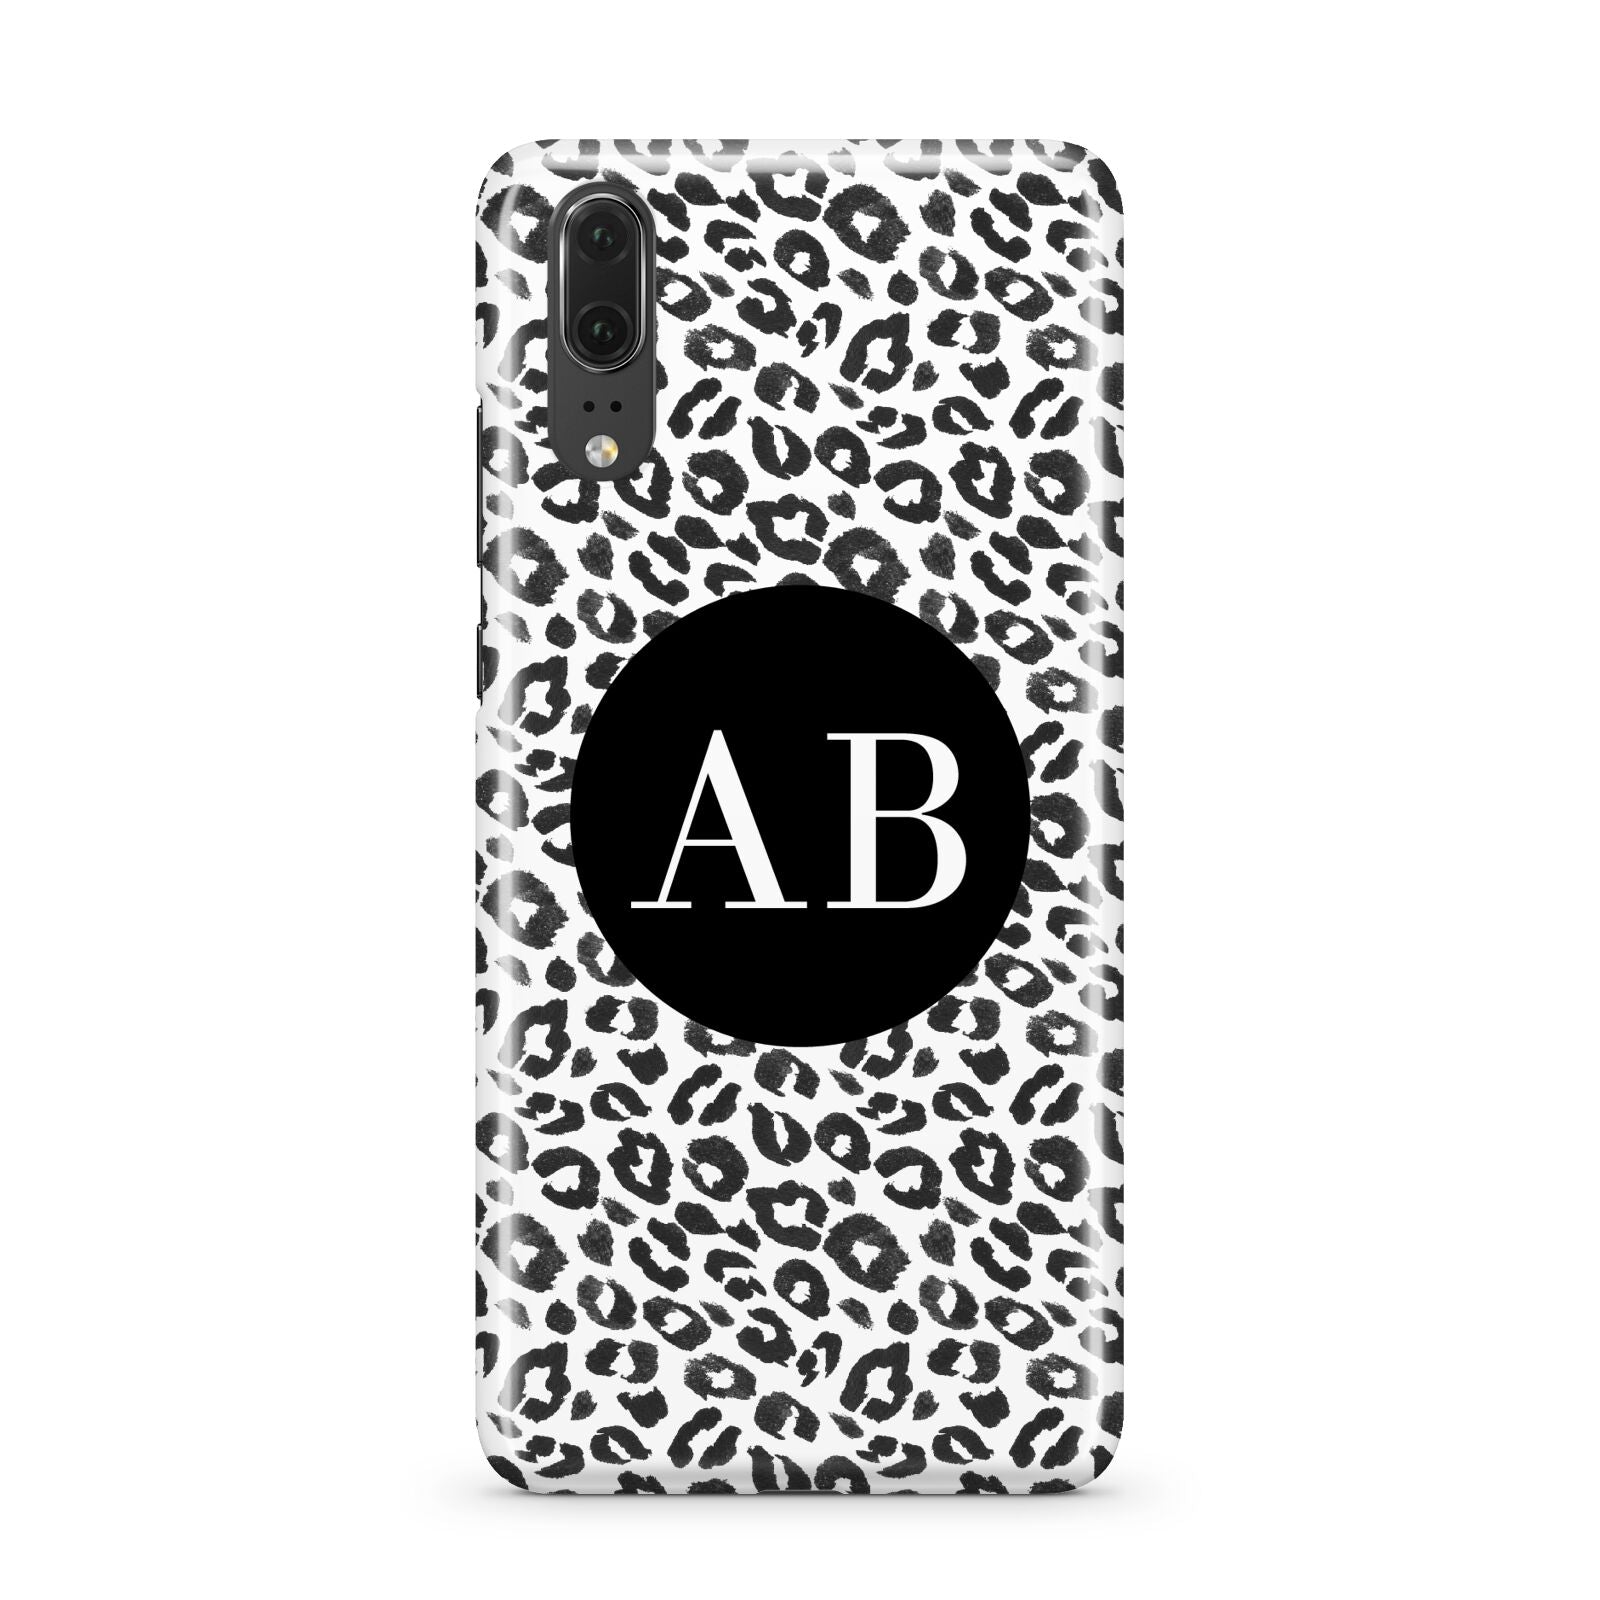 Leopard Print Black and White Huawei P20 Phone Case